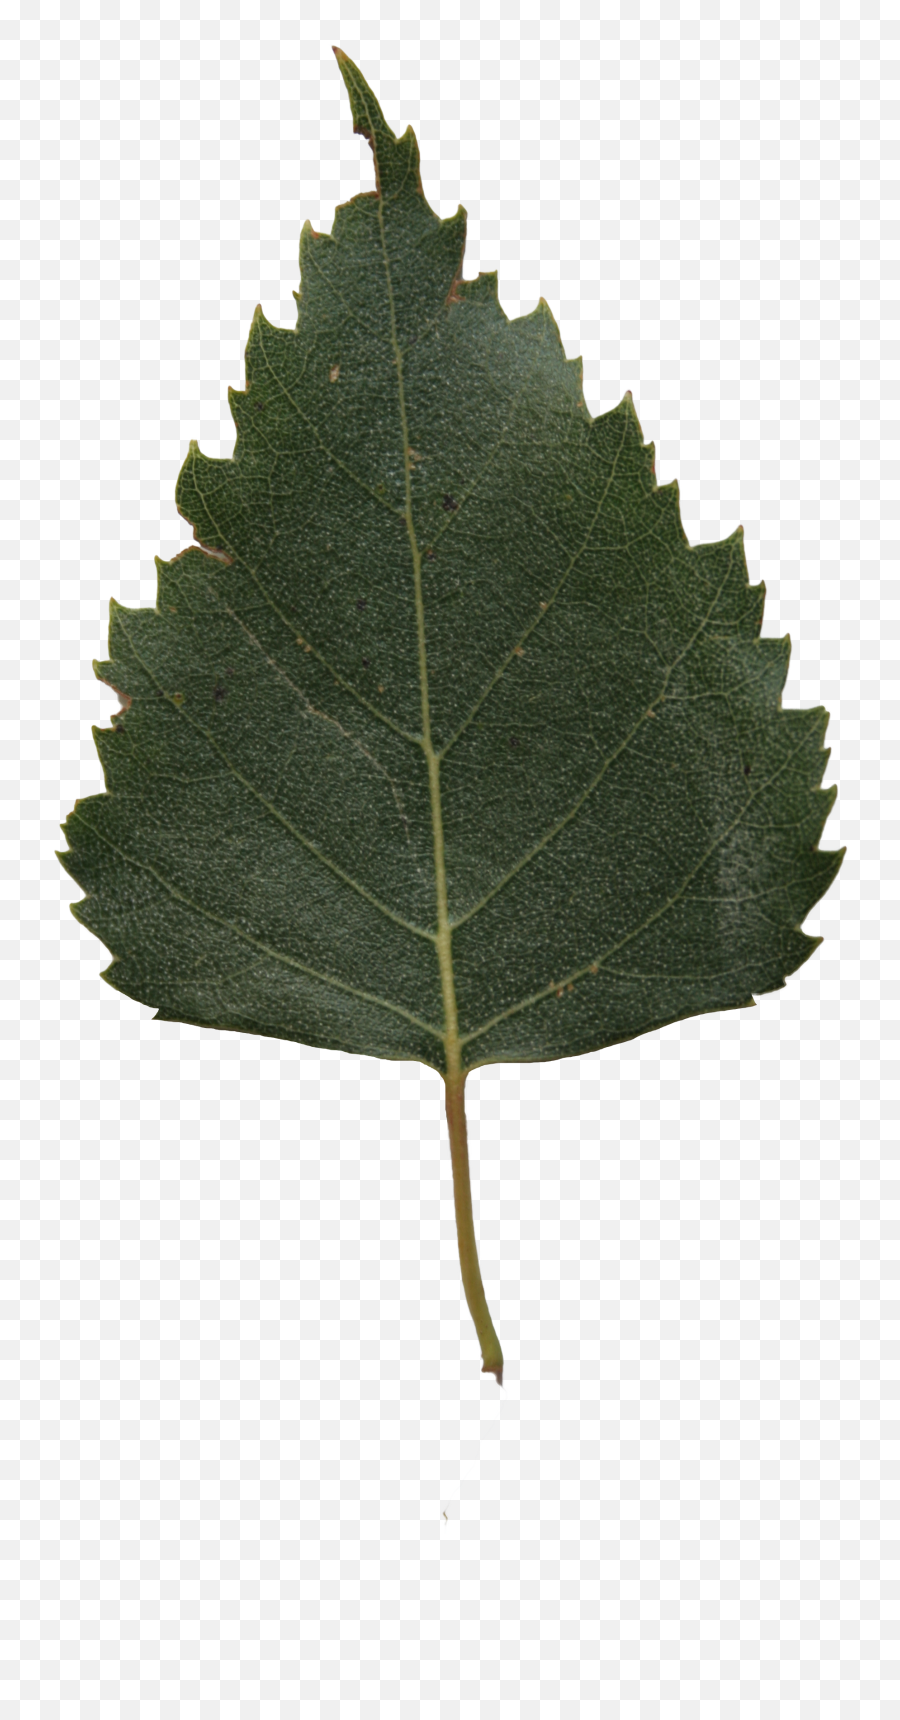 Birch Png Texture Free Cut Out People Trees And Leaves - Birch Leaf Png,Cut Png